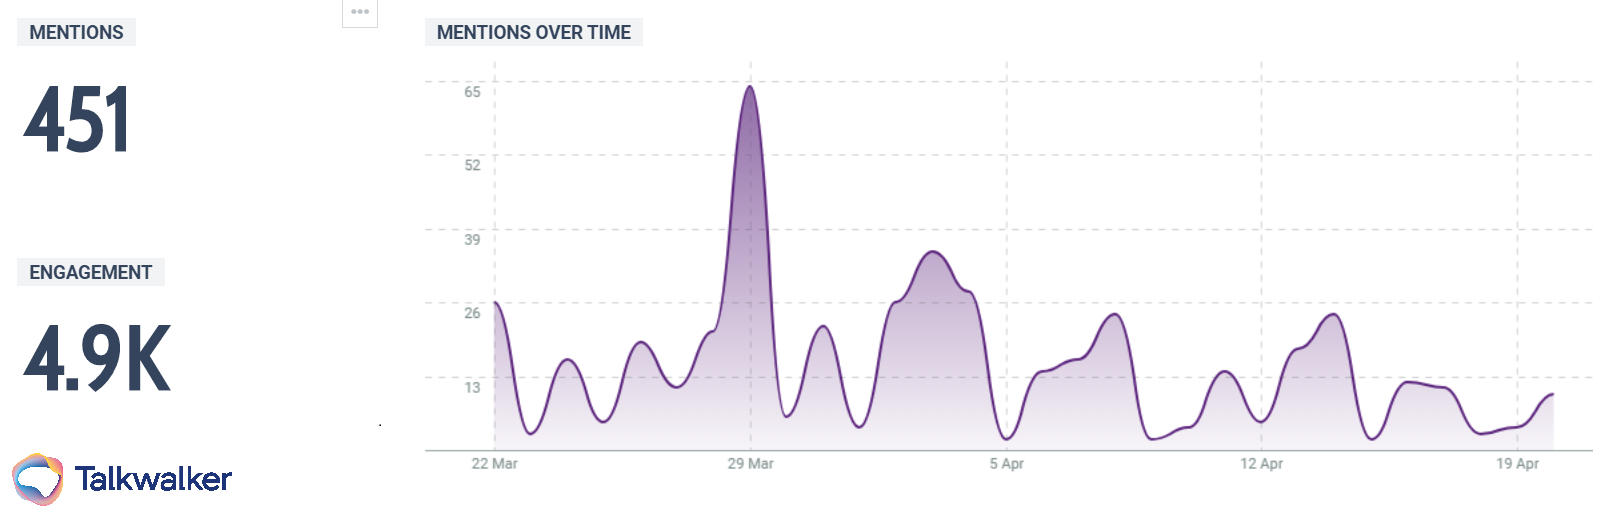 Mentions and engagement related to the #StayHomeStayConnected campaign by 